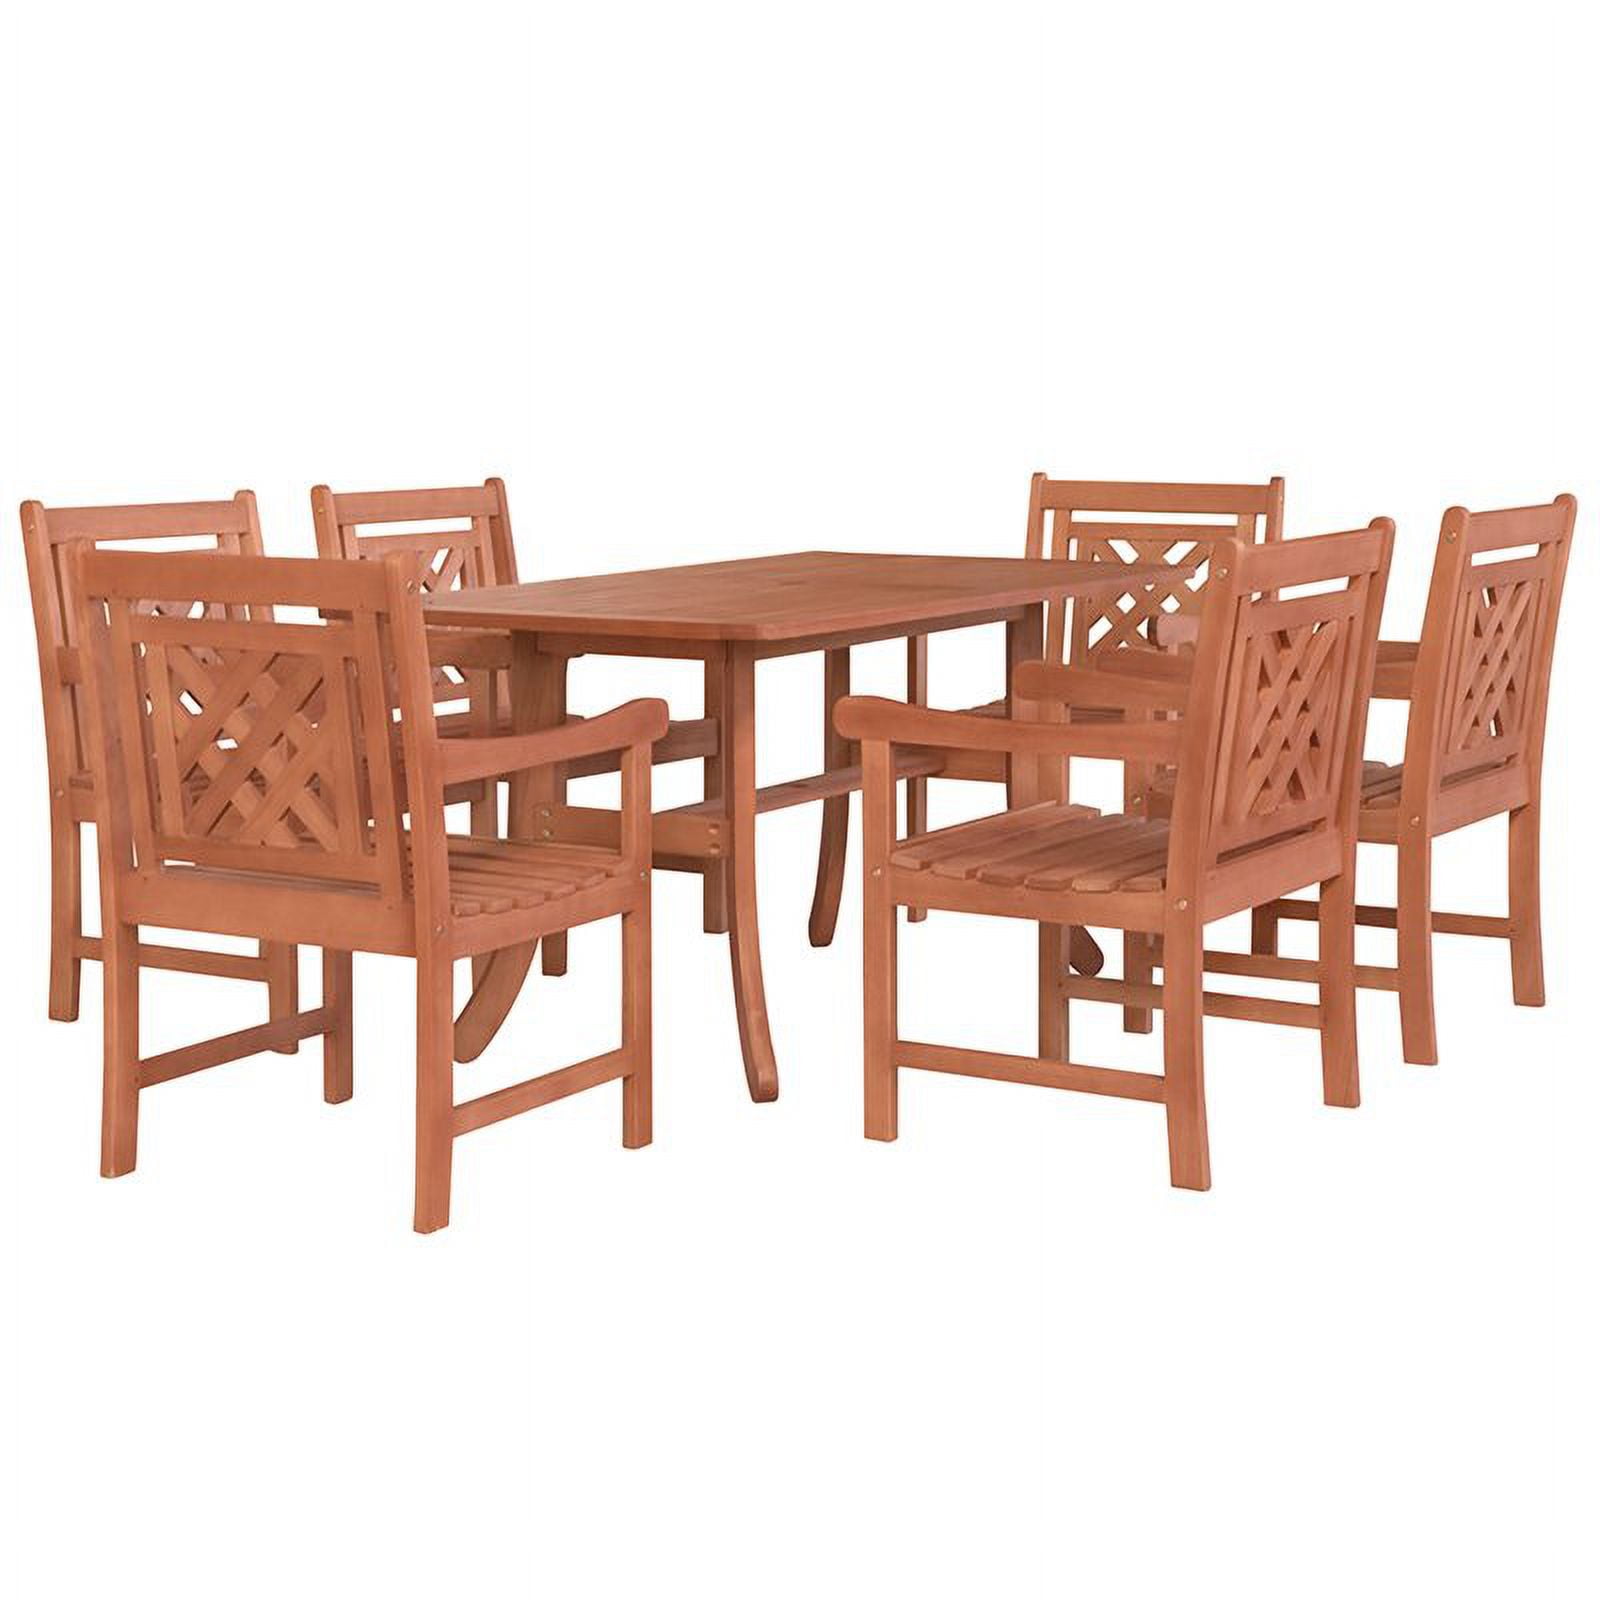 V189set46 Malibu Outdoor Wood Patio Curvy Legs Table Dining Set, Natural Wood - 34 X 22 X 24 In. - 7 Piece